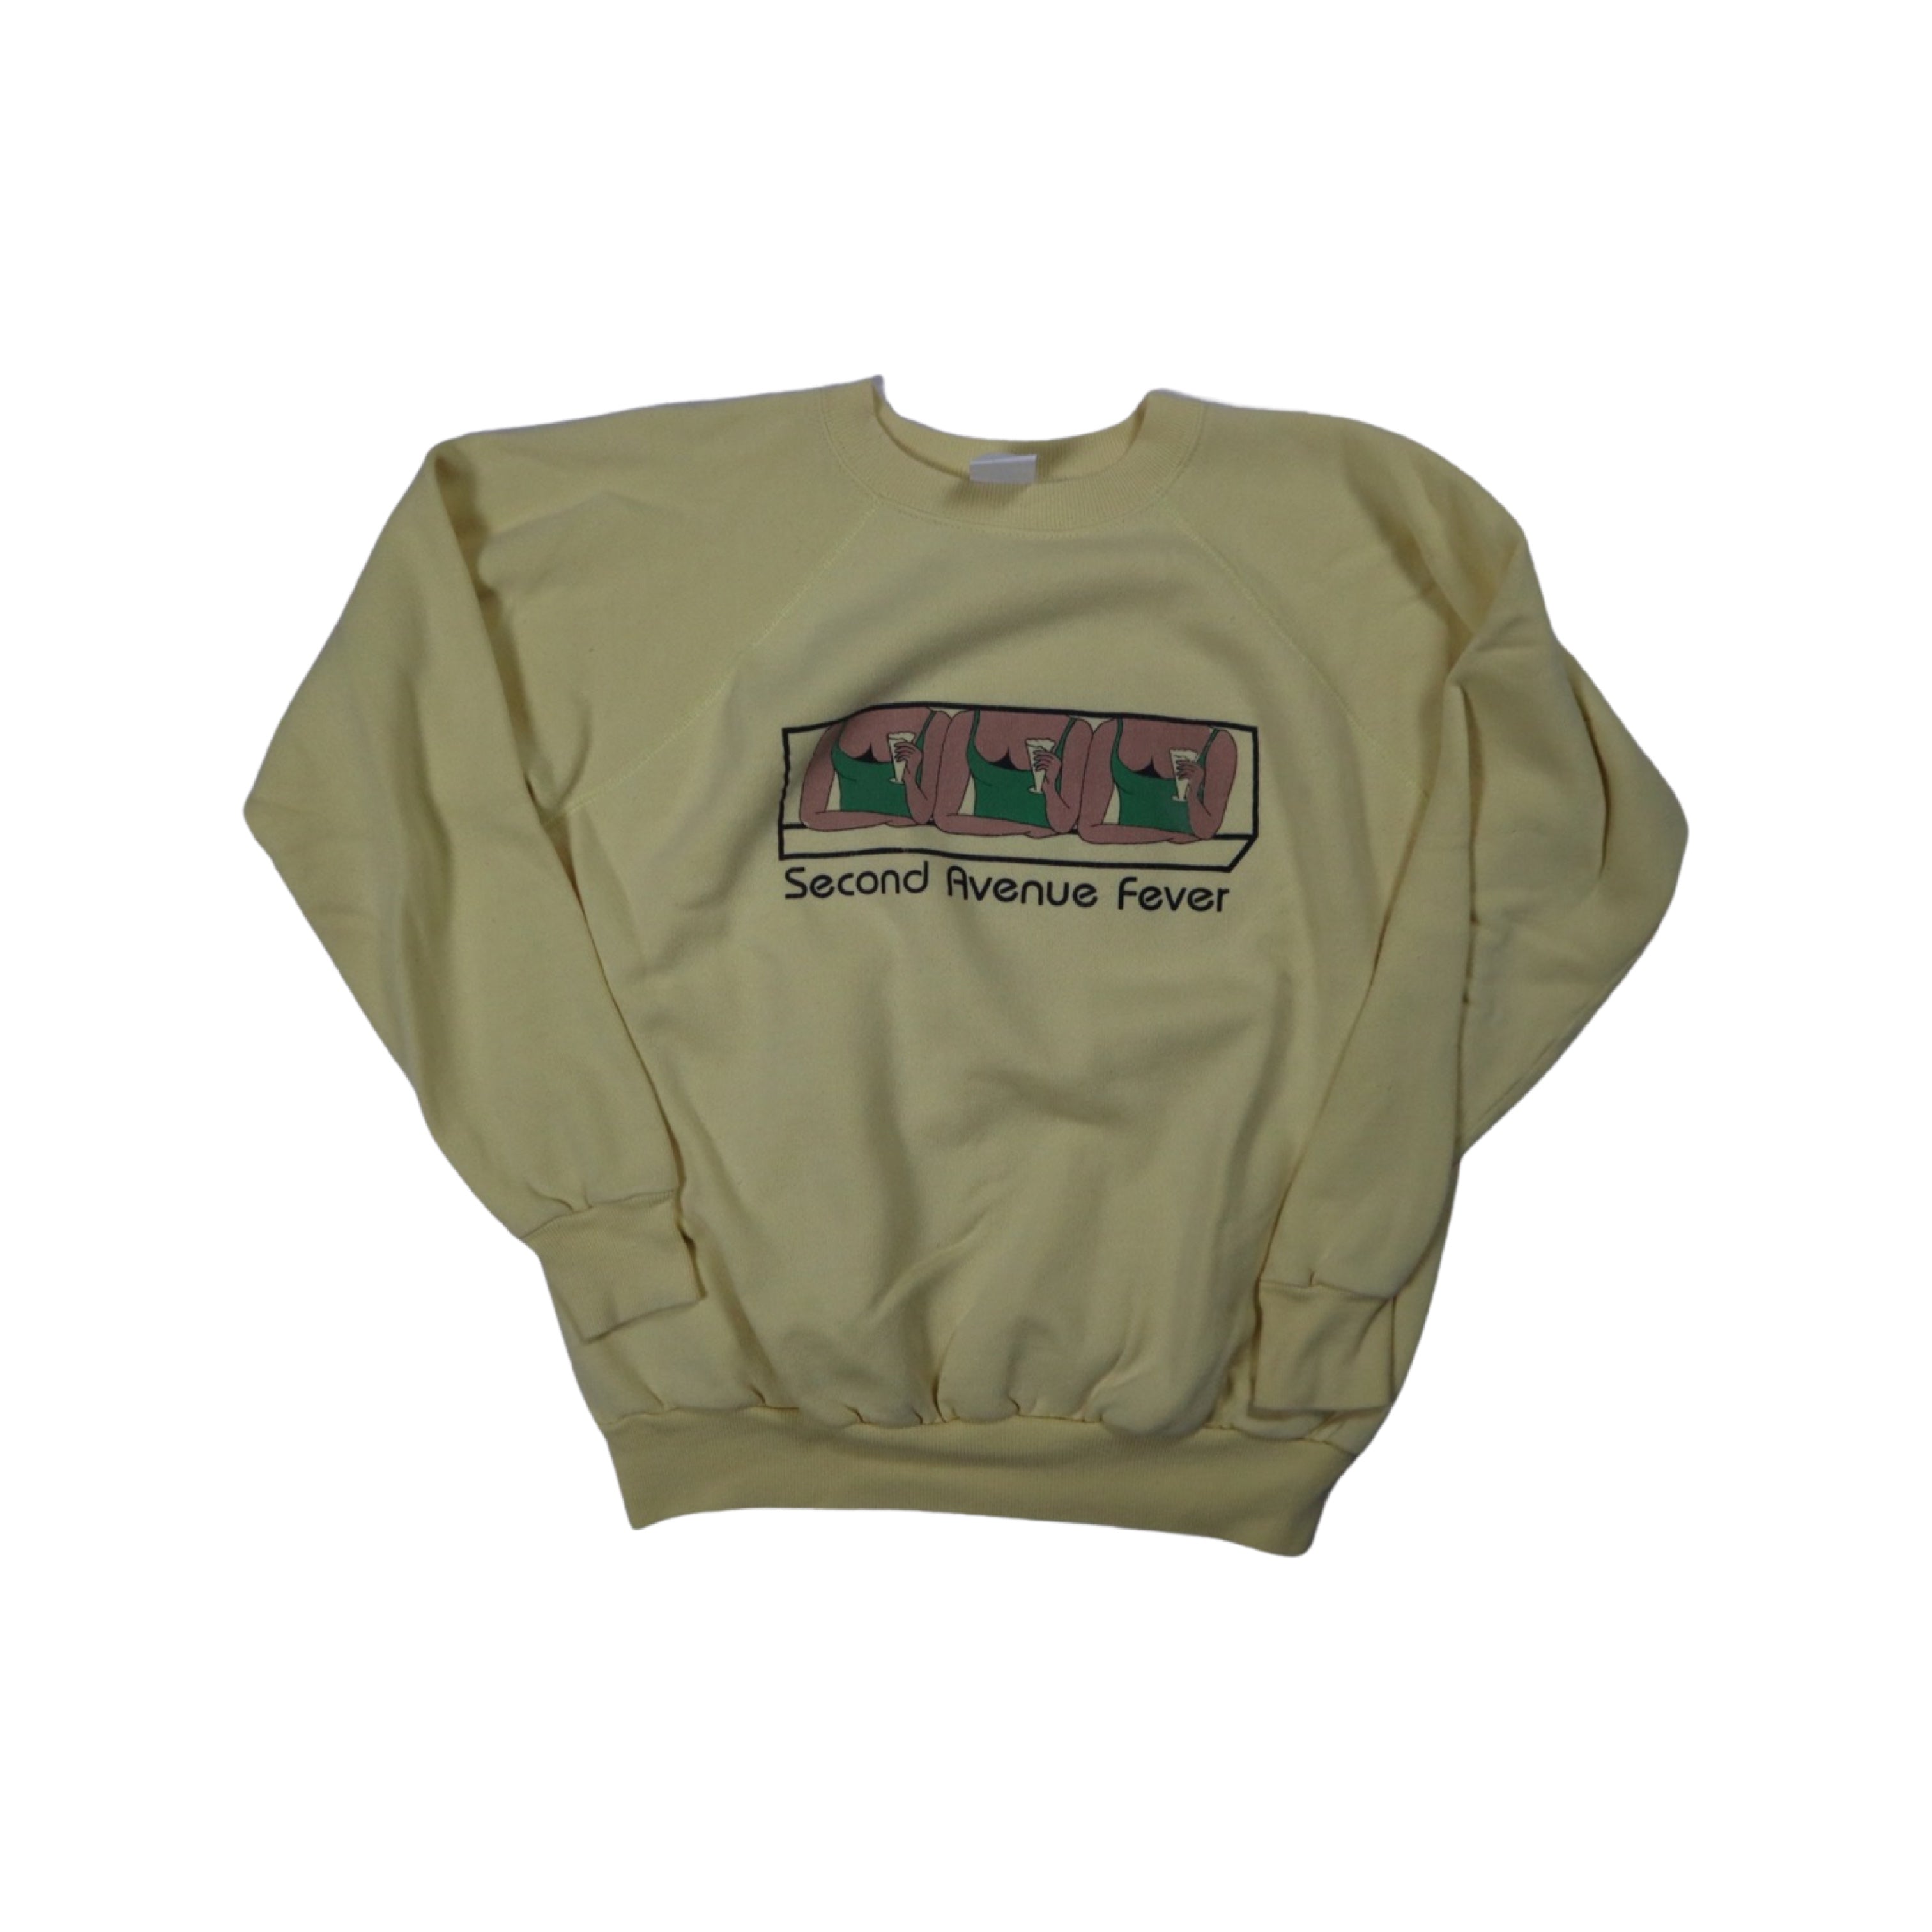 Second Avenue Fever 80s Sweater (Small)